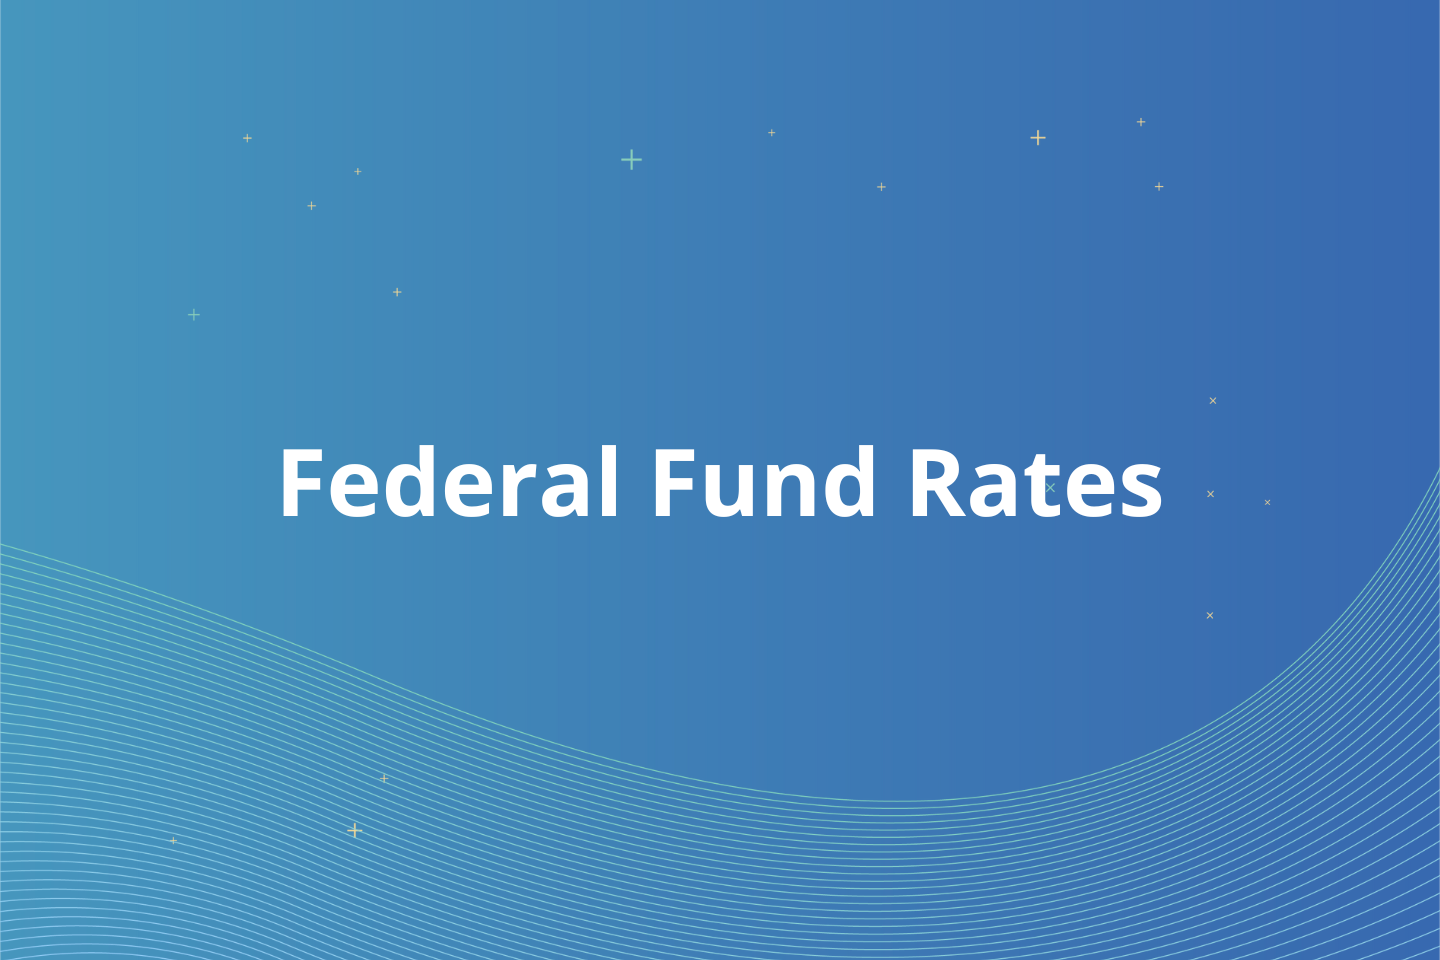 How Does a Falling Federal Funds Rate Affect Debt Securities?